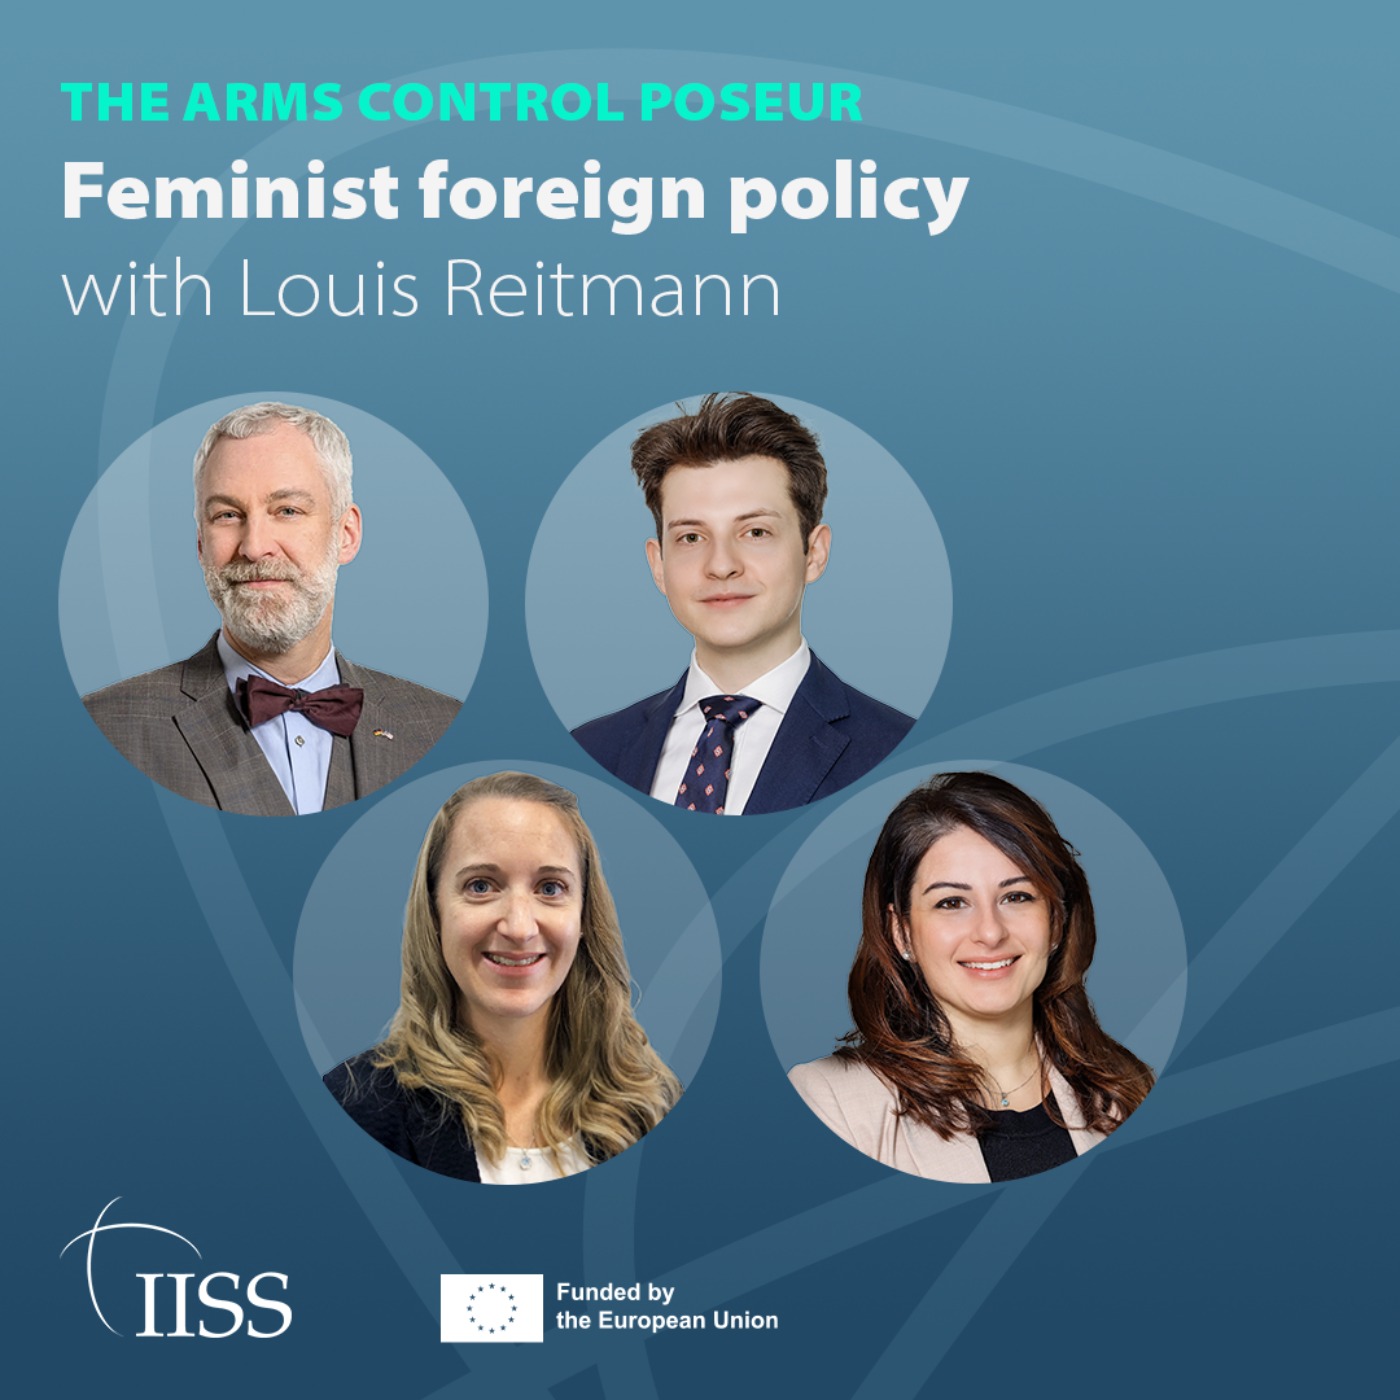 Feminist foreign policy with Louis Reitmann